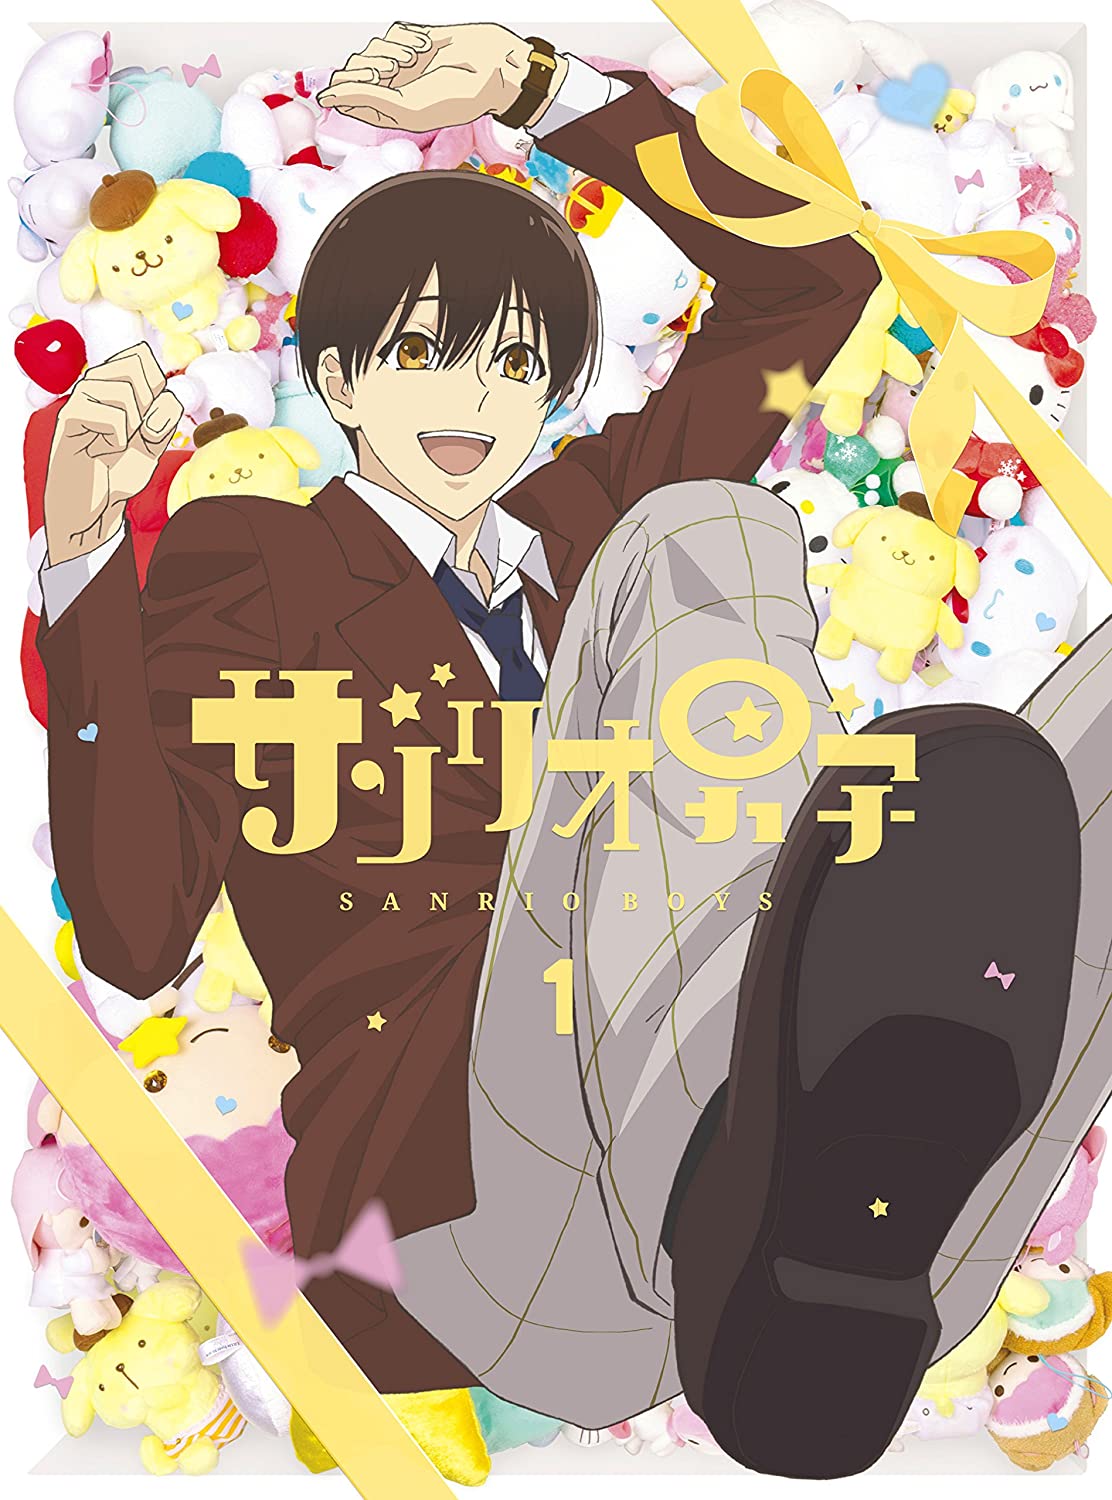 TV Anime Sanrio Boys Volume 1 / Event Ticket Priority Sales Ticket (with Noon) Included [Blu Ray] JAPANESE EDITION: Movies & TV